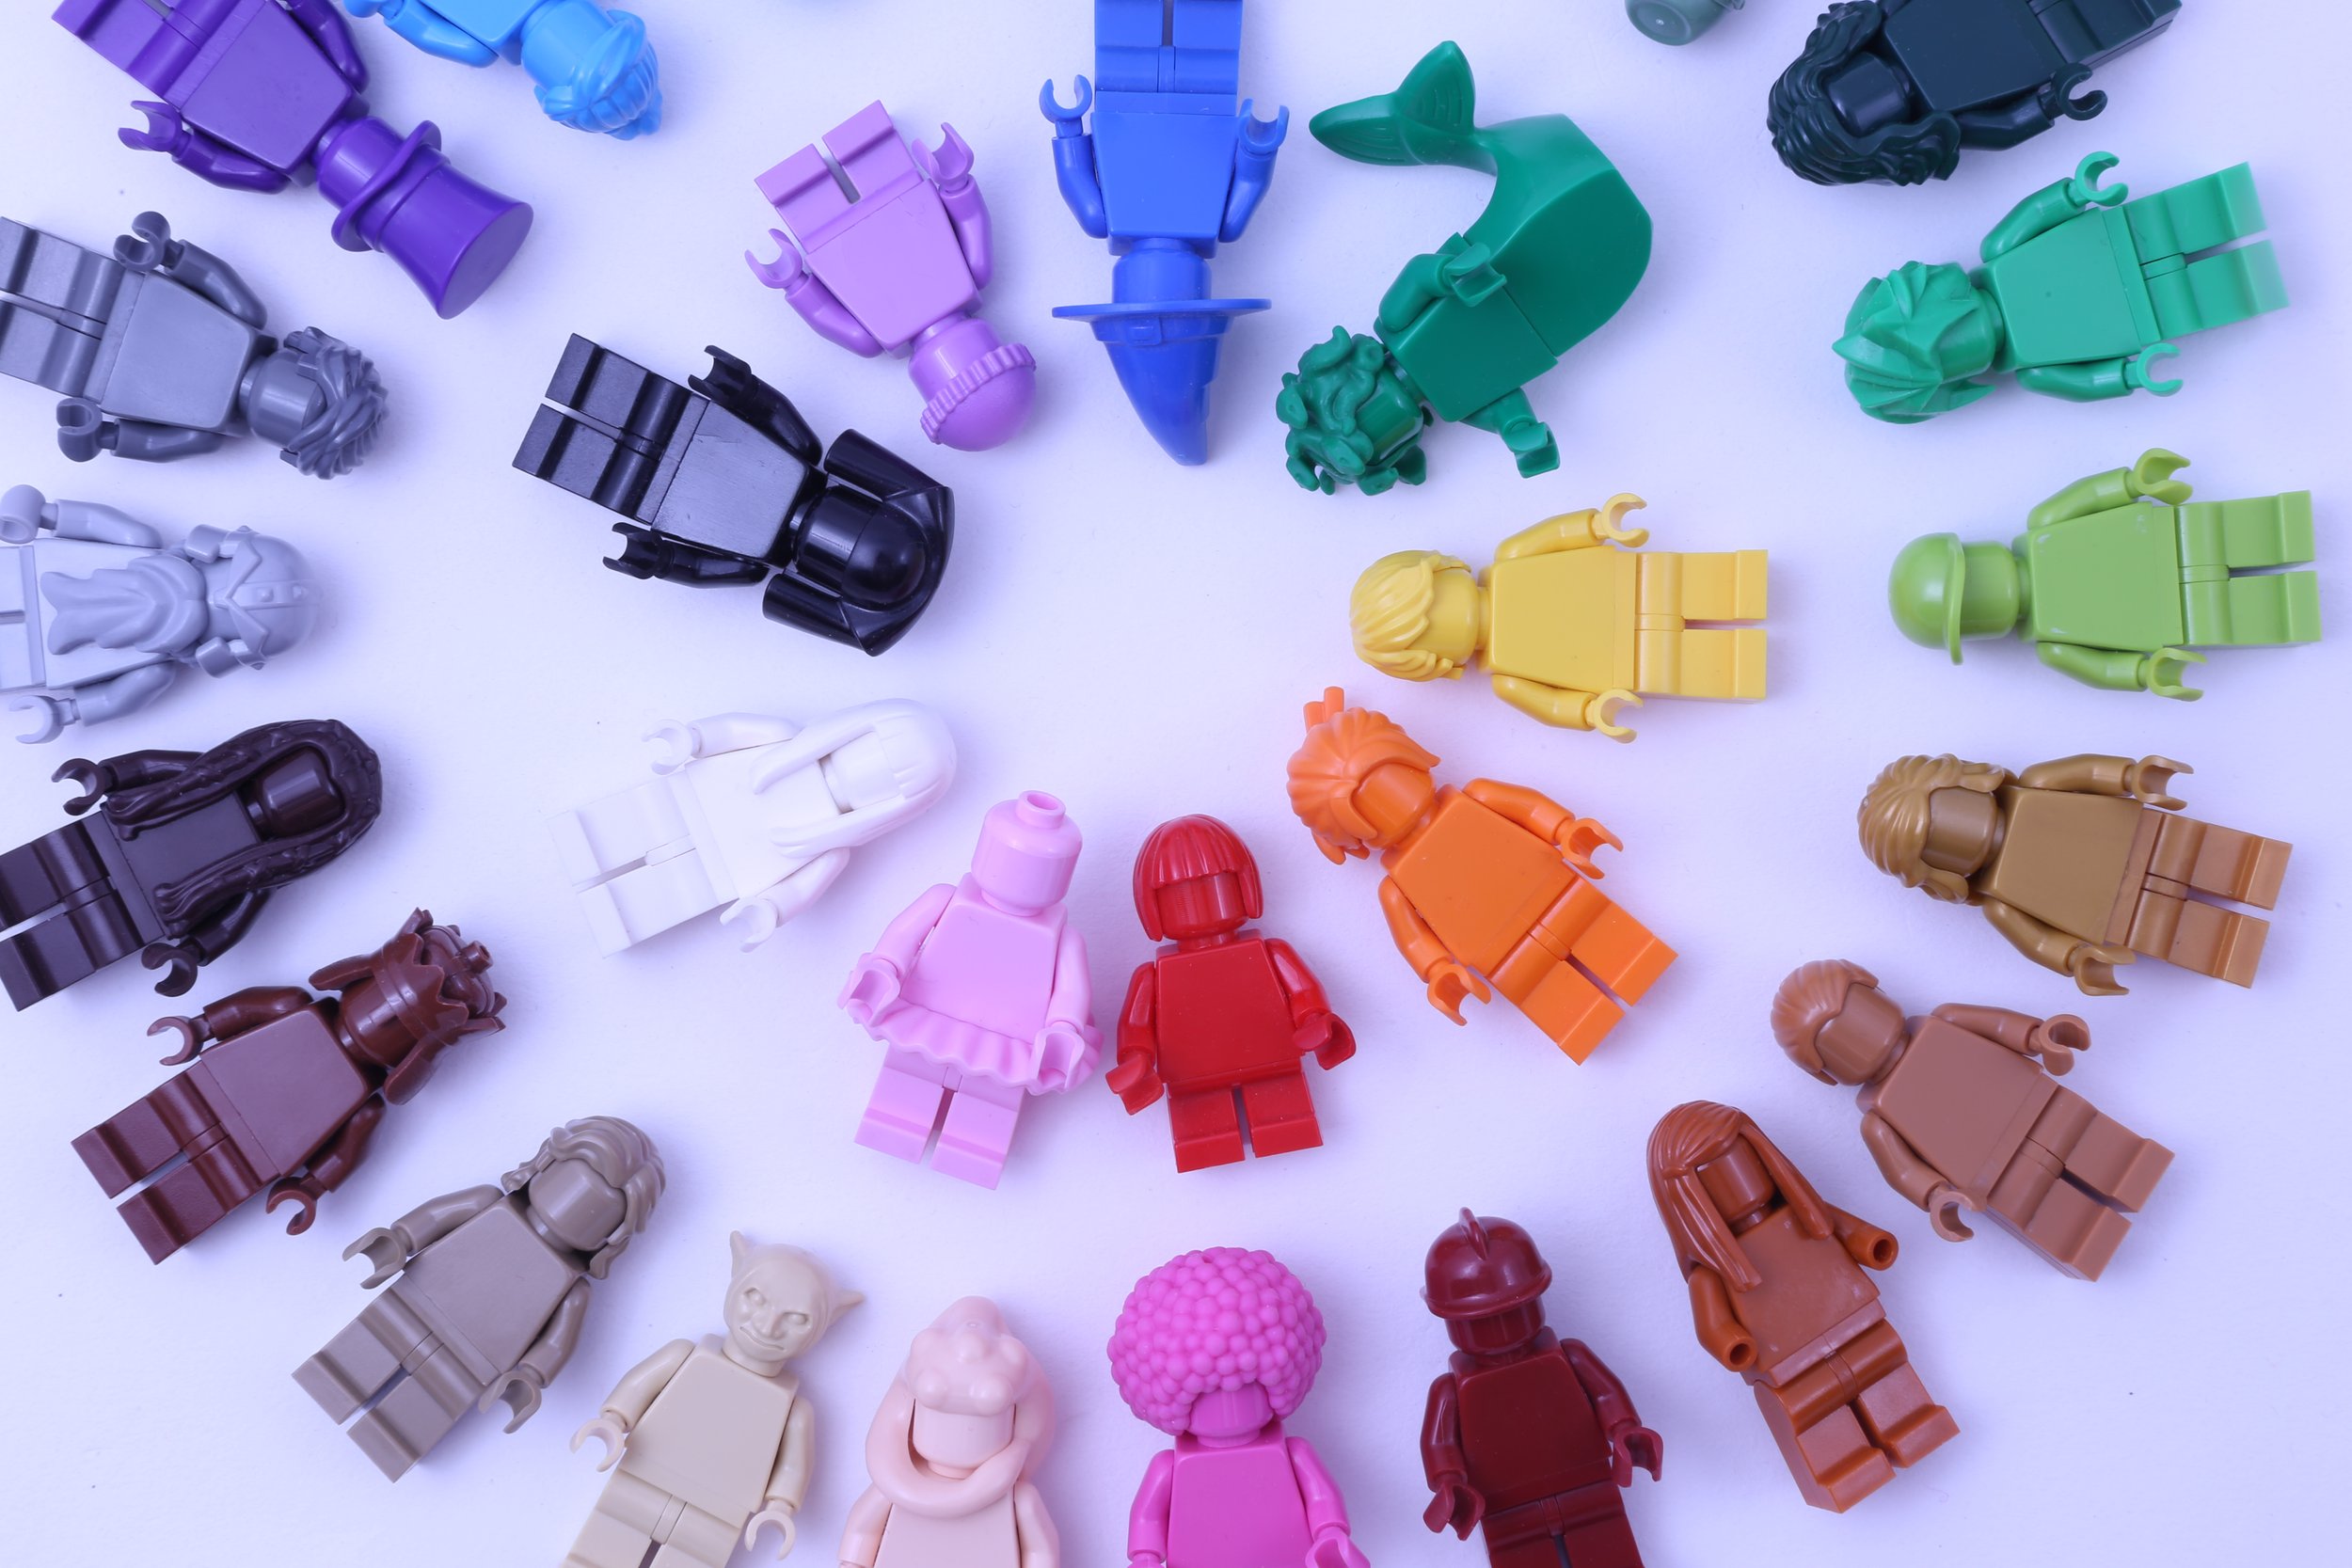 Behind the Alliance: A Conversation LEGO Diversity and Inclusion - BrickNerd - All things LEGO and the LEGO fan community